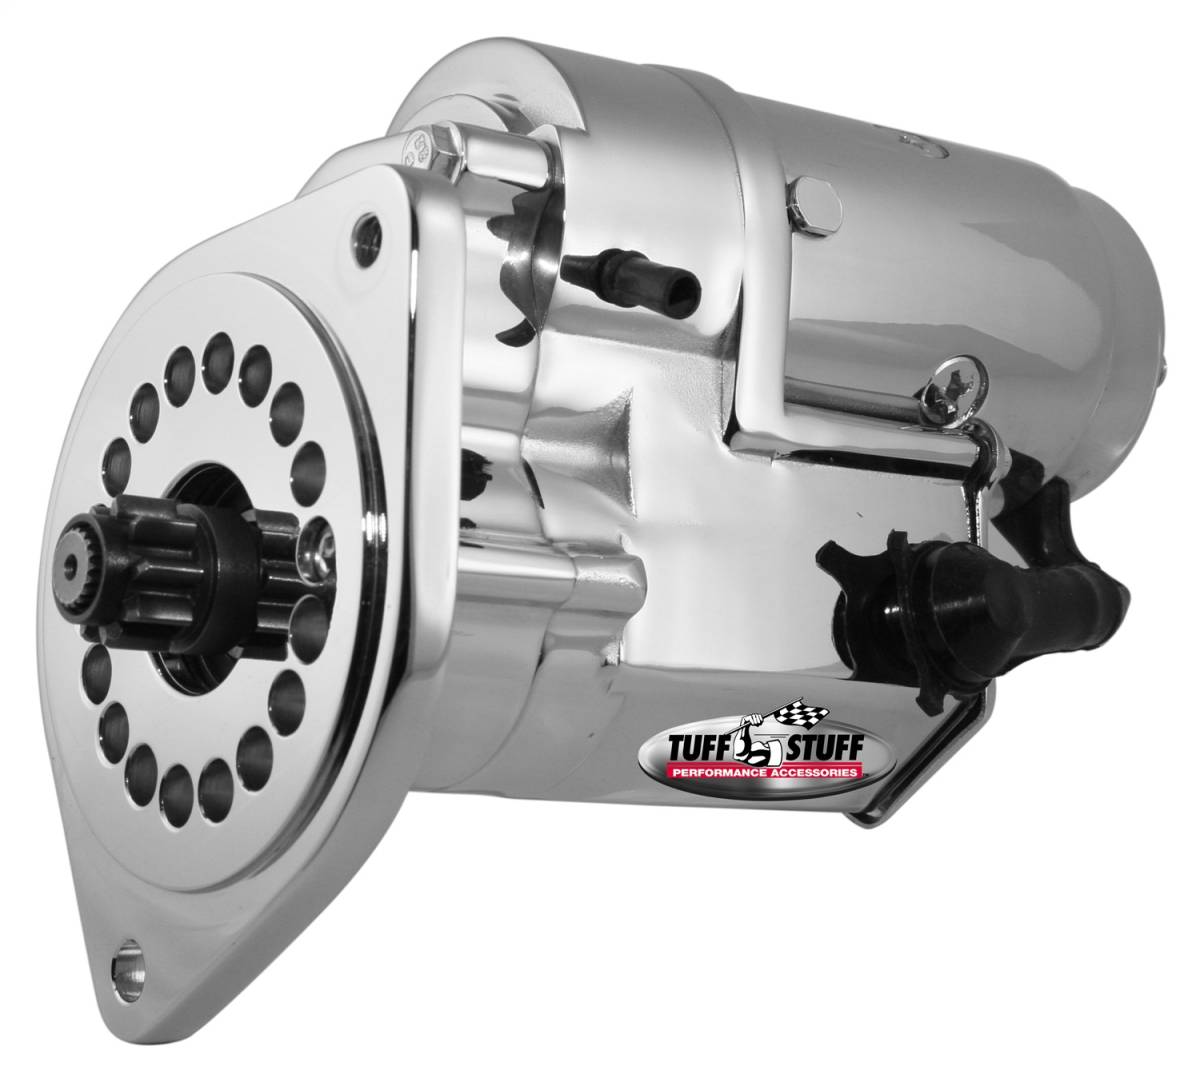 Tuff Stuff Performance - Gear Reduction Starter Tuff Torque 2 Hole Mounting-One Hole Is Threaded Chrome 13149A